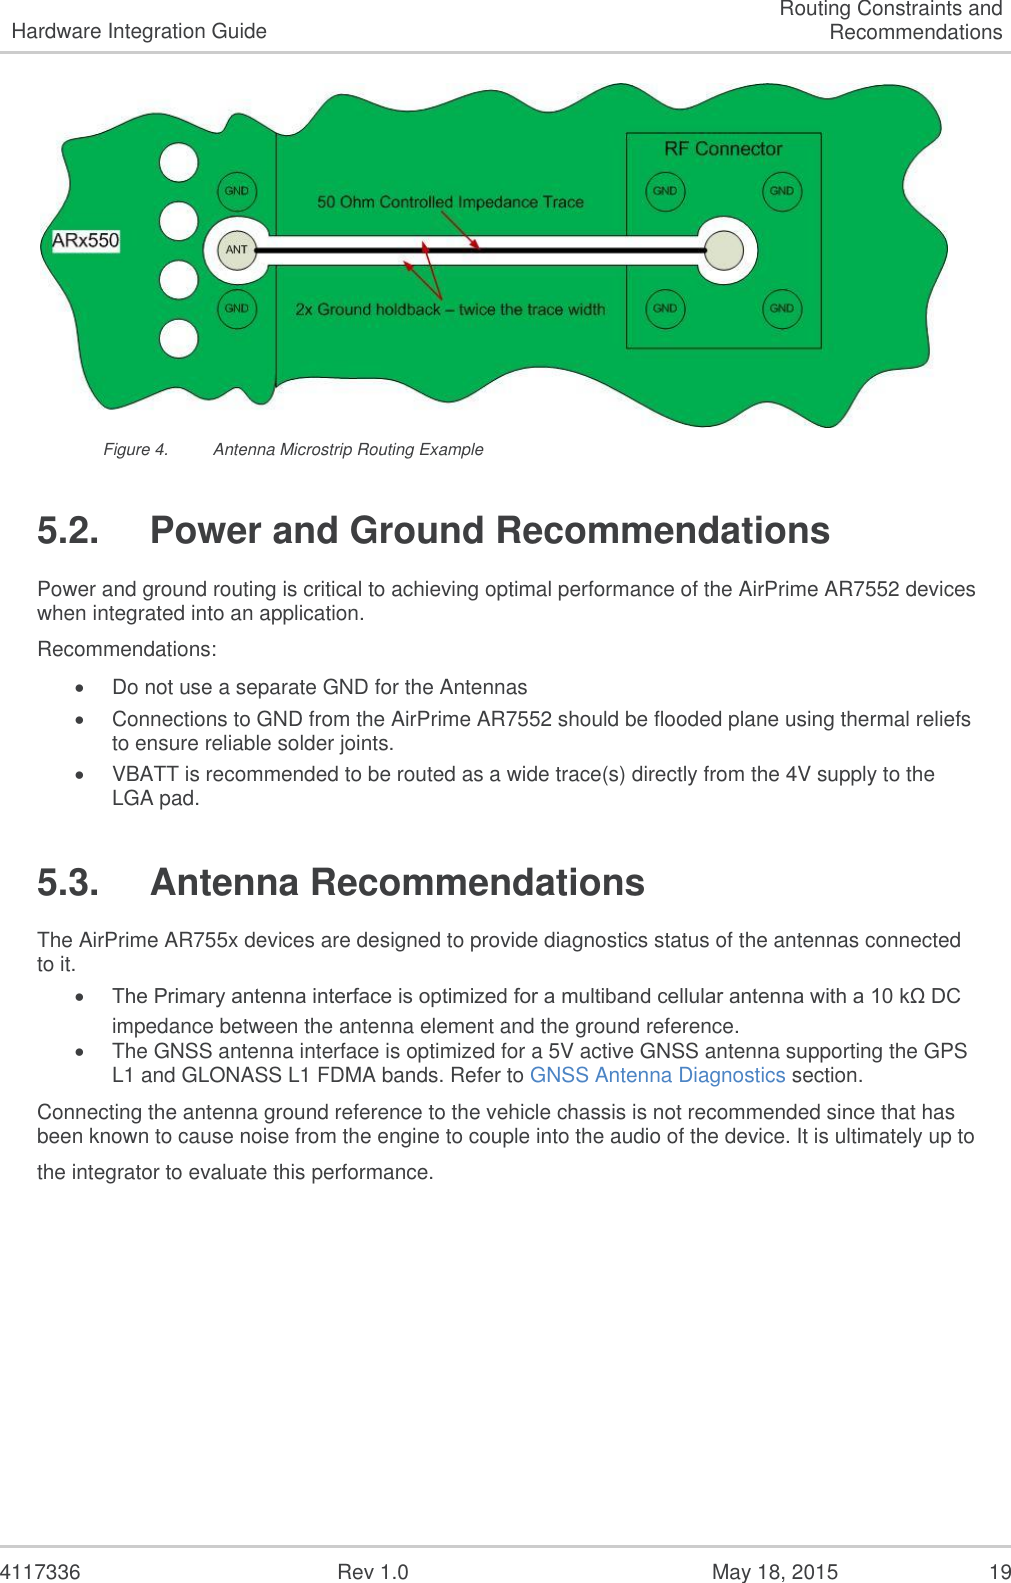   4117336  Rev 1.0  May 18, 2015  19 Hardware Integration Guide Routing Constraints and Recommendations  Figure 4.  Antenna Microstrip Routing Example 5.2.  Power and Ground Recommendations Power and ground routing is critical to achieving optimal performance of the AirPrime AR7552 devices when integrated into an application.   Recommendations:  Do not use a separate GND for the Antennas  Connections to GND from the AirPrime AR7552 should be flooded plane using thermal reliefs to ensure reliable solder joints.  VBATT is recommended to be routed as a wide trace(s) directly from the 4V supply to the LGA pad. 5.3.  Antenna Recommendations The AirPrime AR755x devices are designed to provide diagnostics status of the antennas connected to it.  The Primary antenna interface is optimized for a multiband cellular antenna with a 10 kΩ DC impedance between the antenna element and the ground reference.   The GNSS antenna interface is optimized for a 5V active GNSS antenna supporting the GPS L1 and GLONASS L1 FDMA bands. Refer to GNSS Antenna Diagnostics section. Connecting the antenna ground reference to the vehicle chassis is not recommended since that has been known to cause noise from the engine to couple into the audio of the device. It is ultimately up to the integrator to evaluate this performance.   